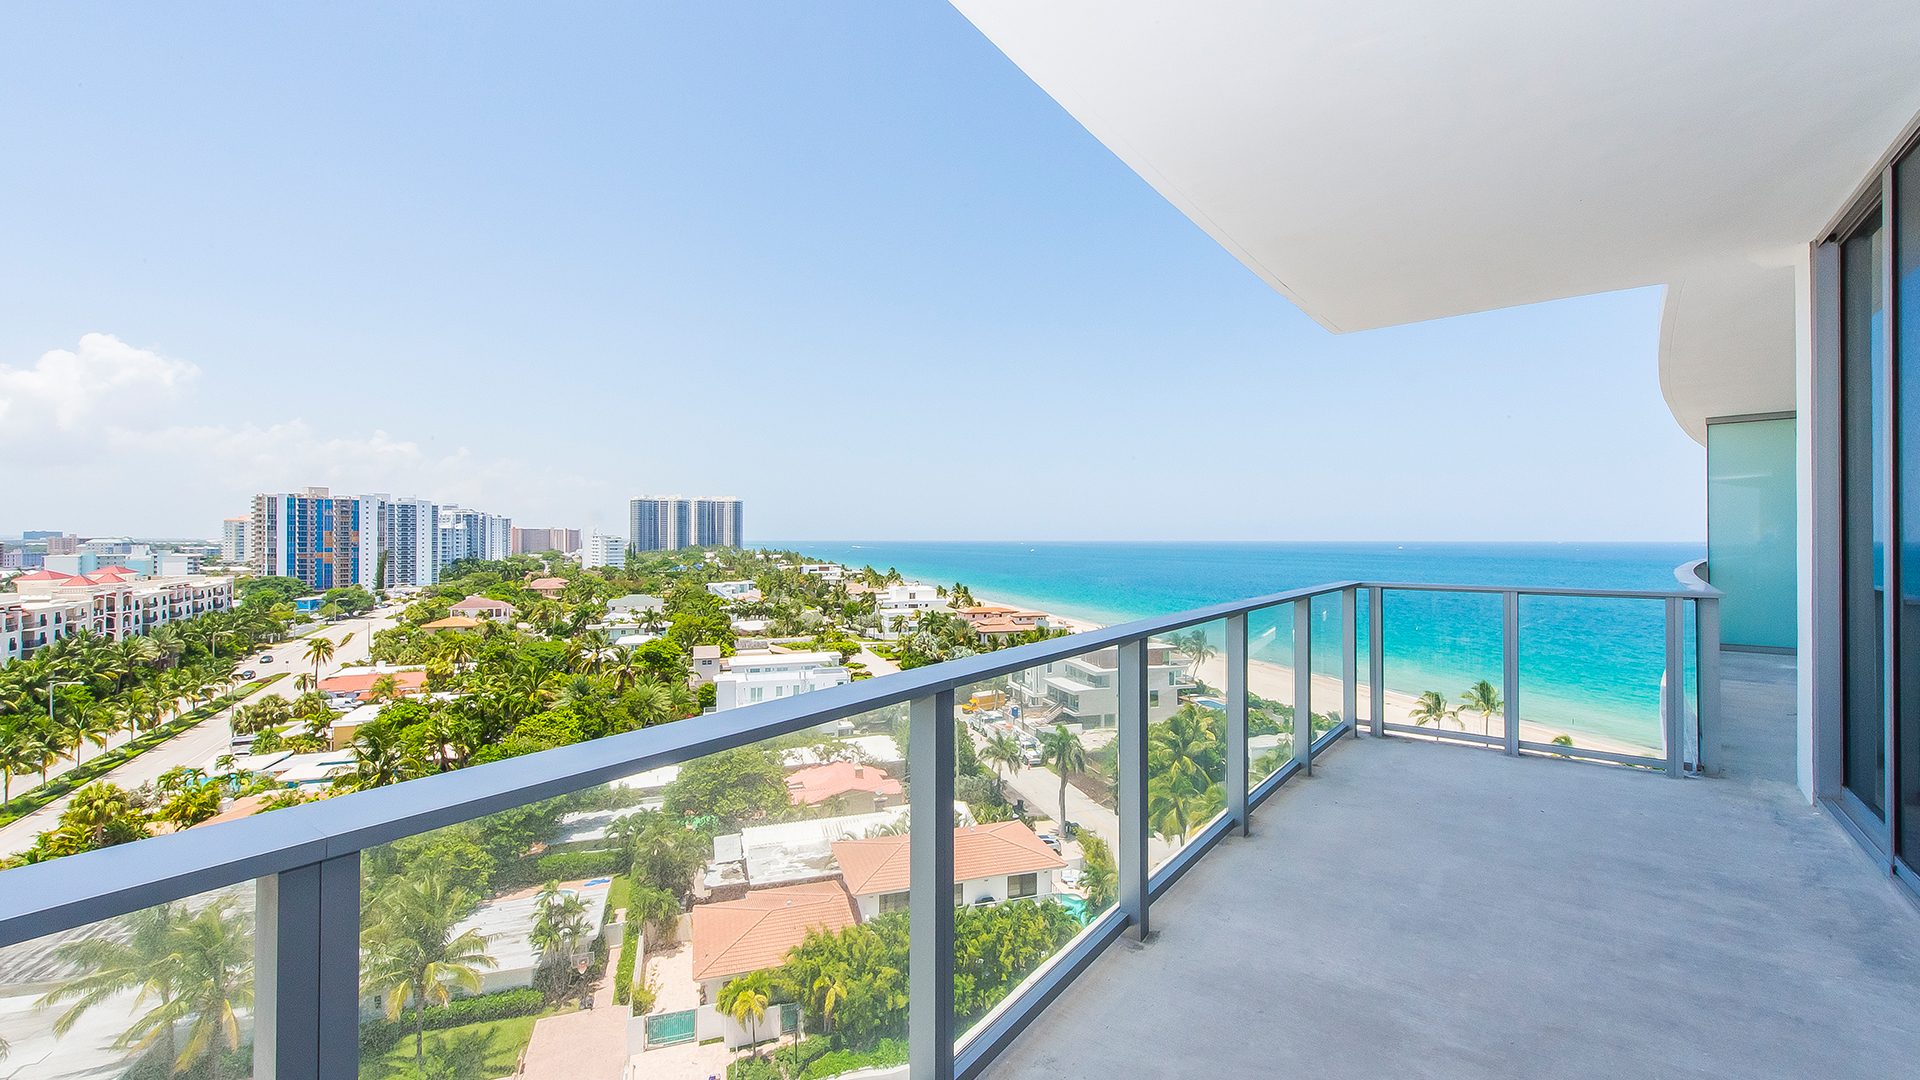 Residence N902 at Auberge Beach Residences and Spa Fort Lauderdale, FL 33305